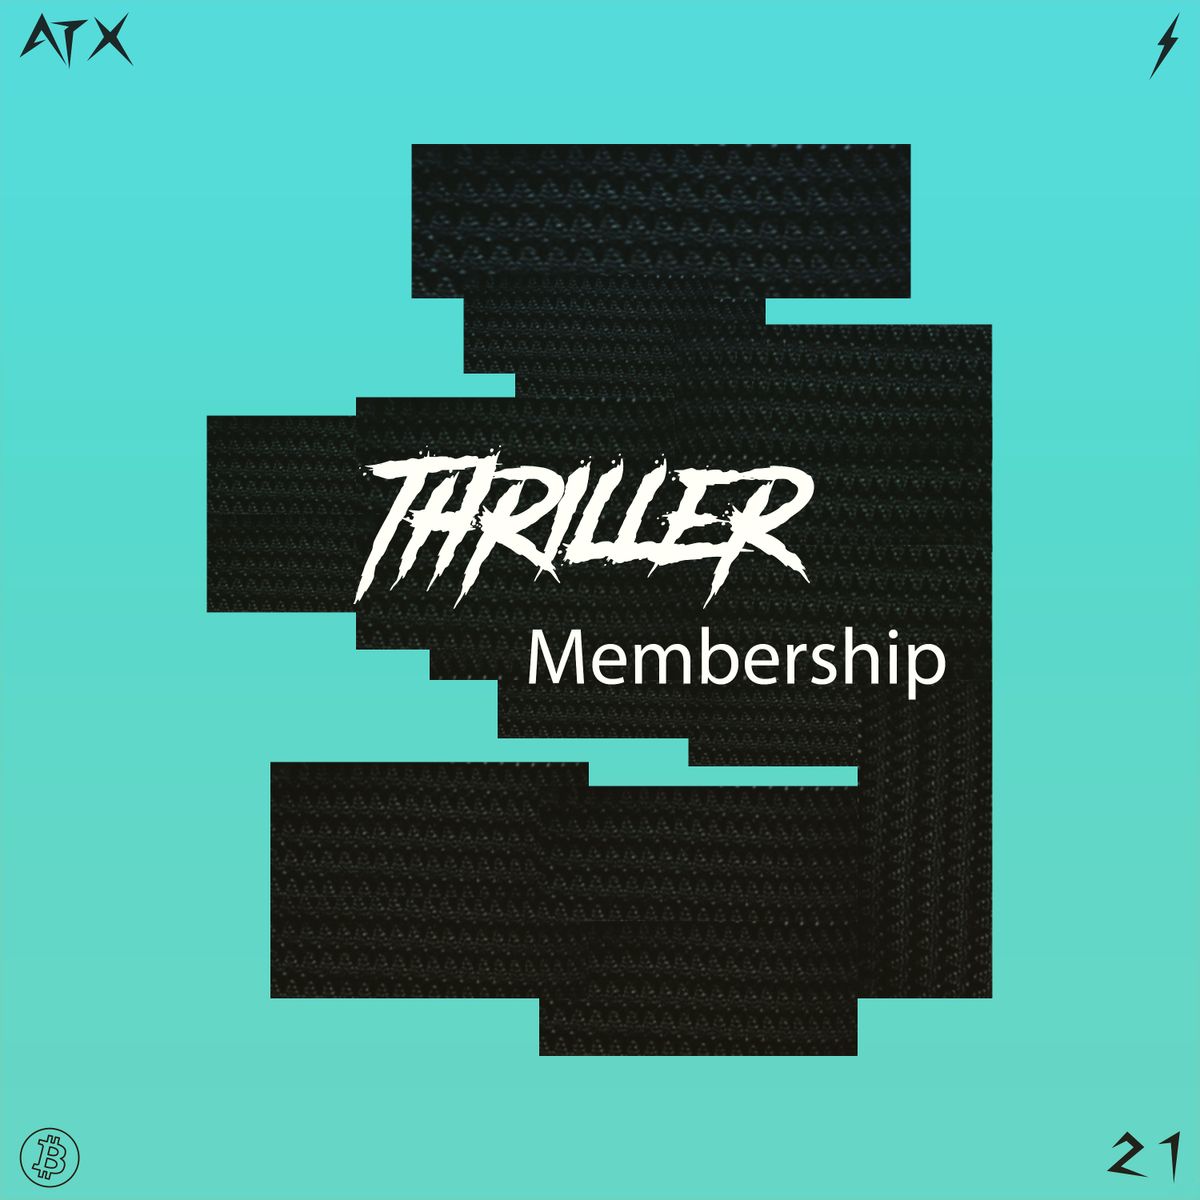 Your Thriller ⚡ Membership is active!